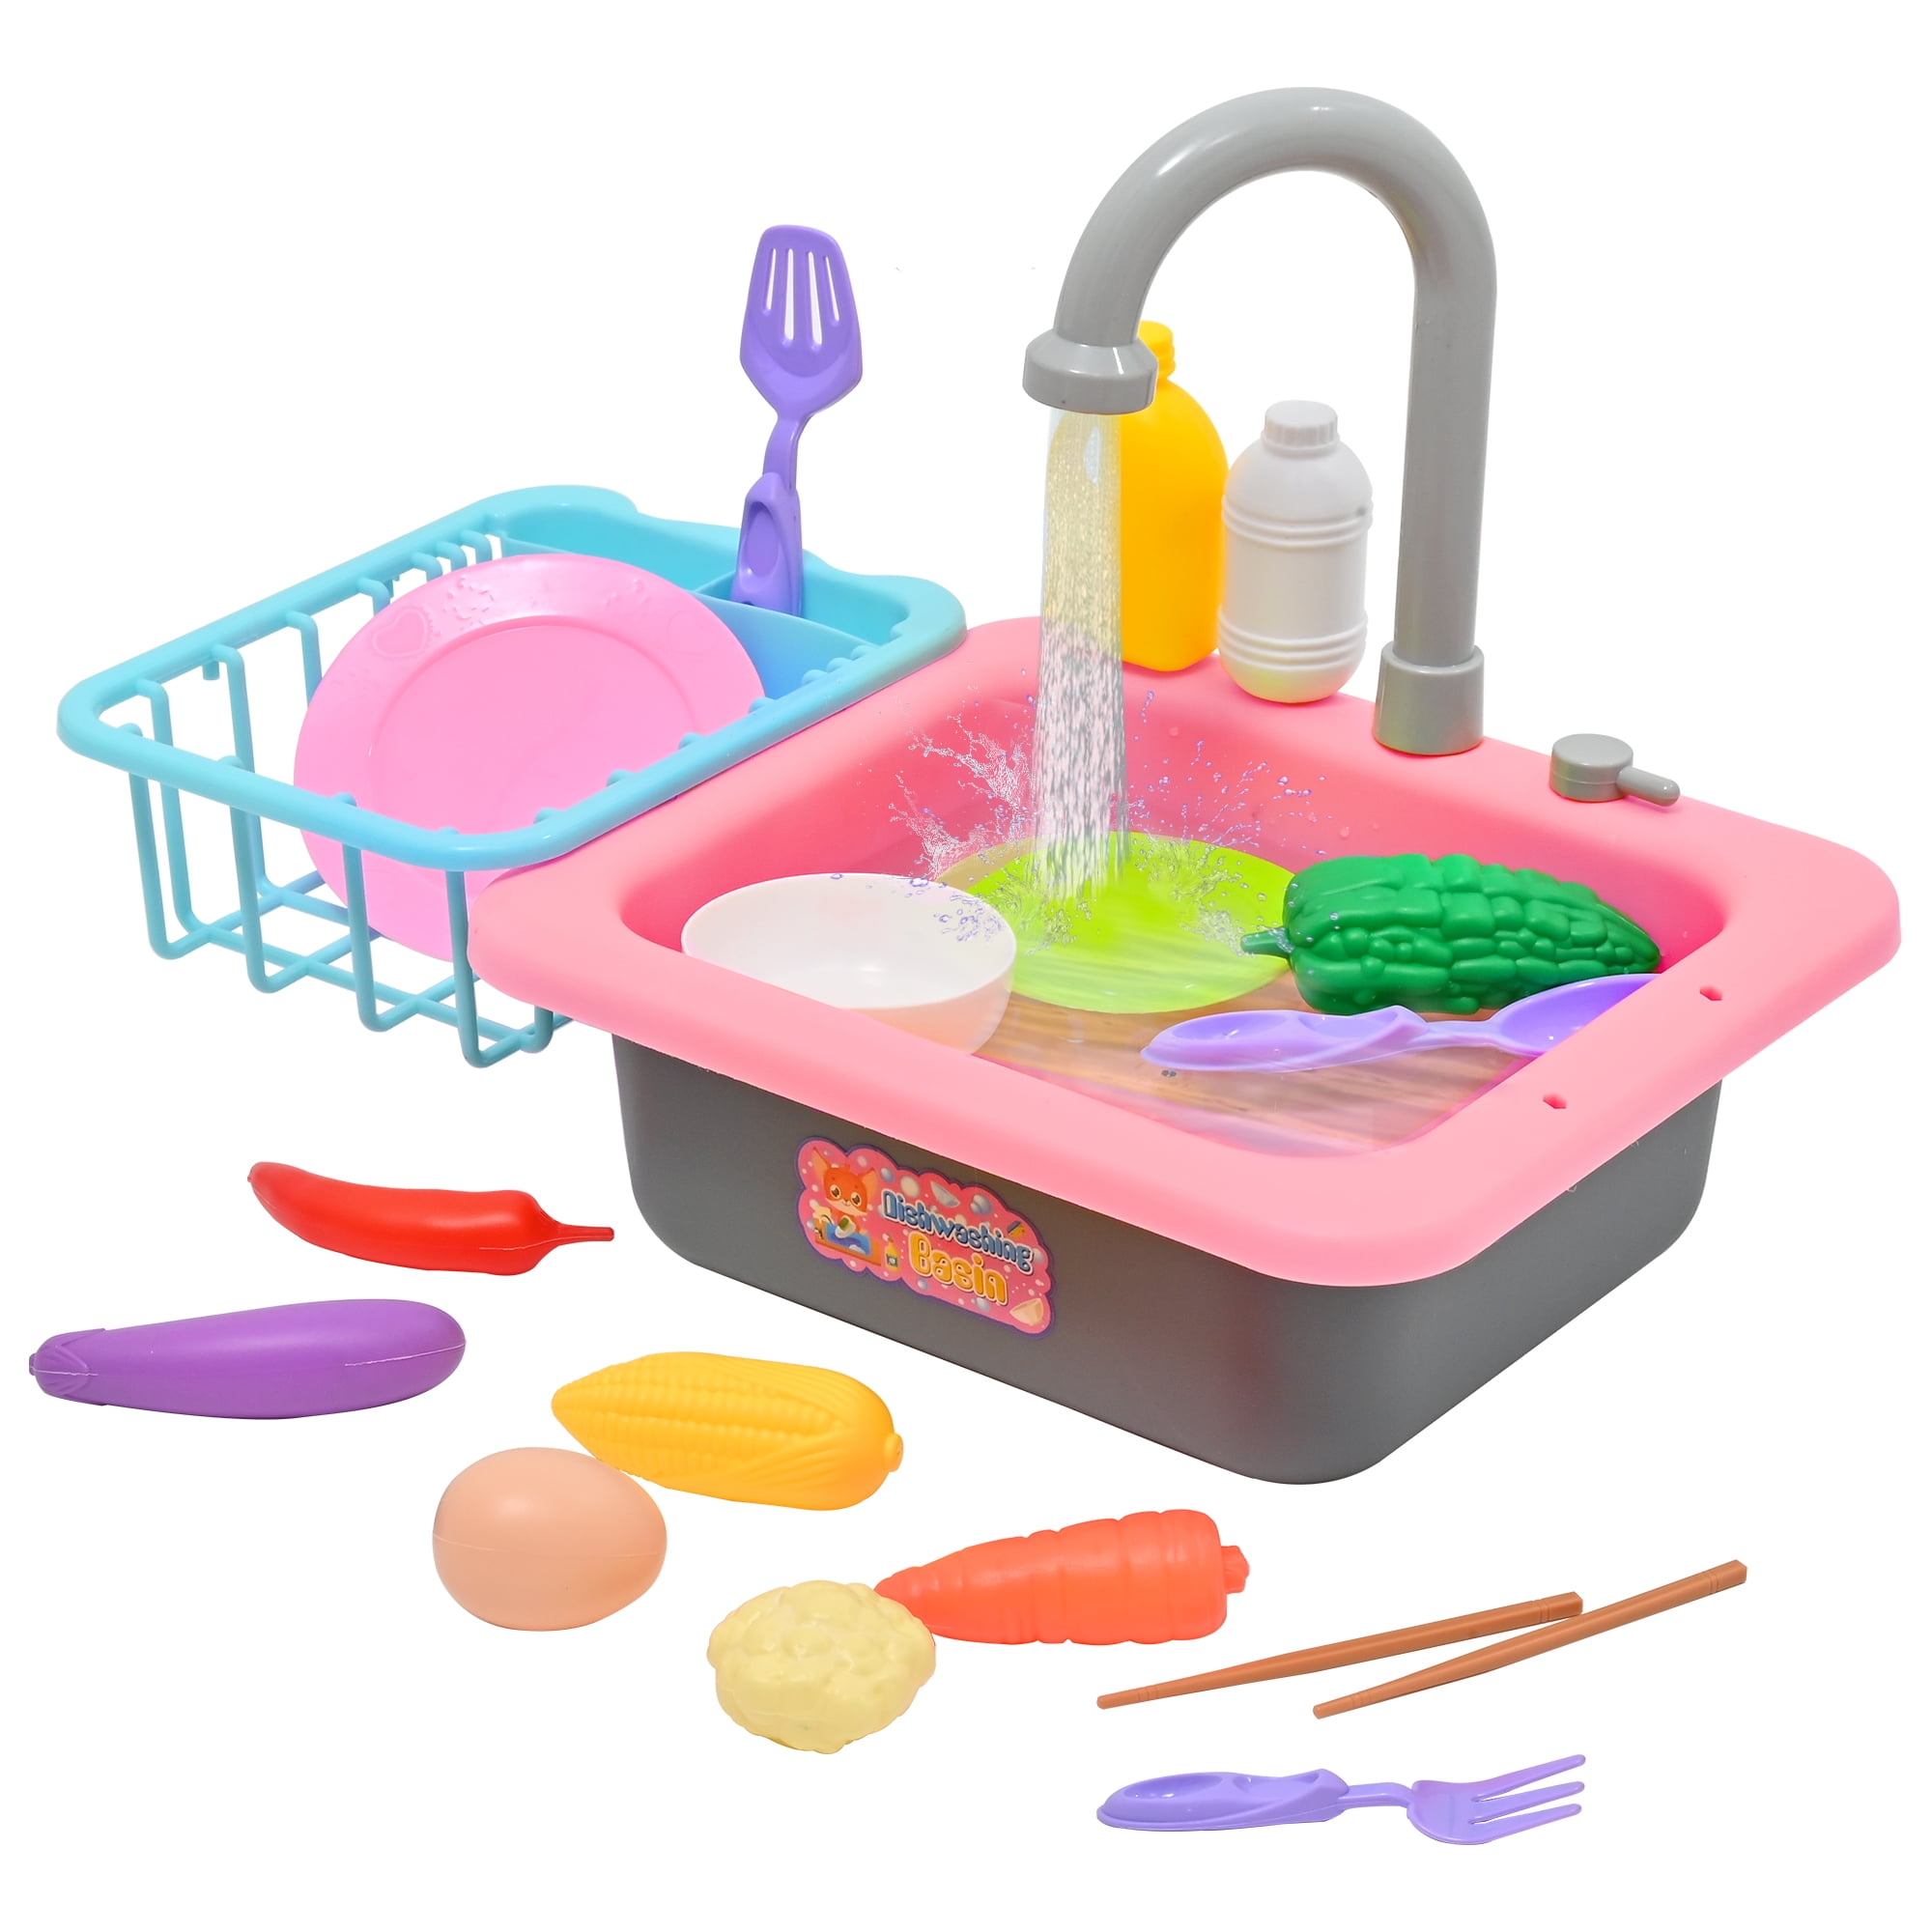  SmartChef Play Kitchen Sink Toys, Blue Electric Dishwasher Playing  Toy with Running Water, Play Food & Tableware Accessories, Kitchen Set Toys,  Role Play Sink Set for Toddlers Kids Boys Girls 